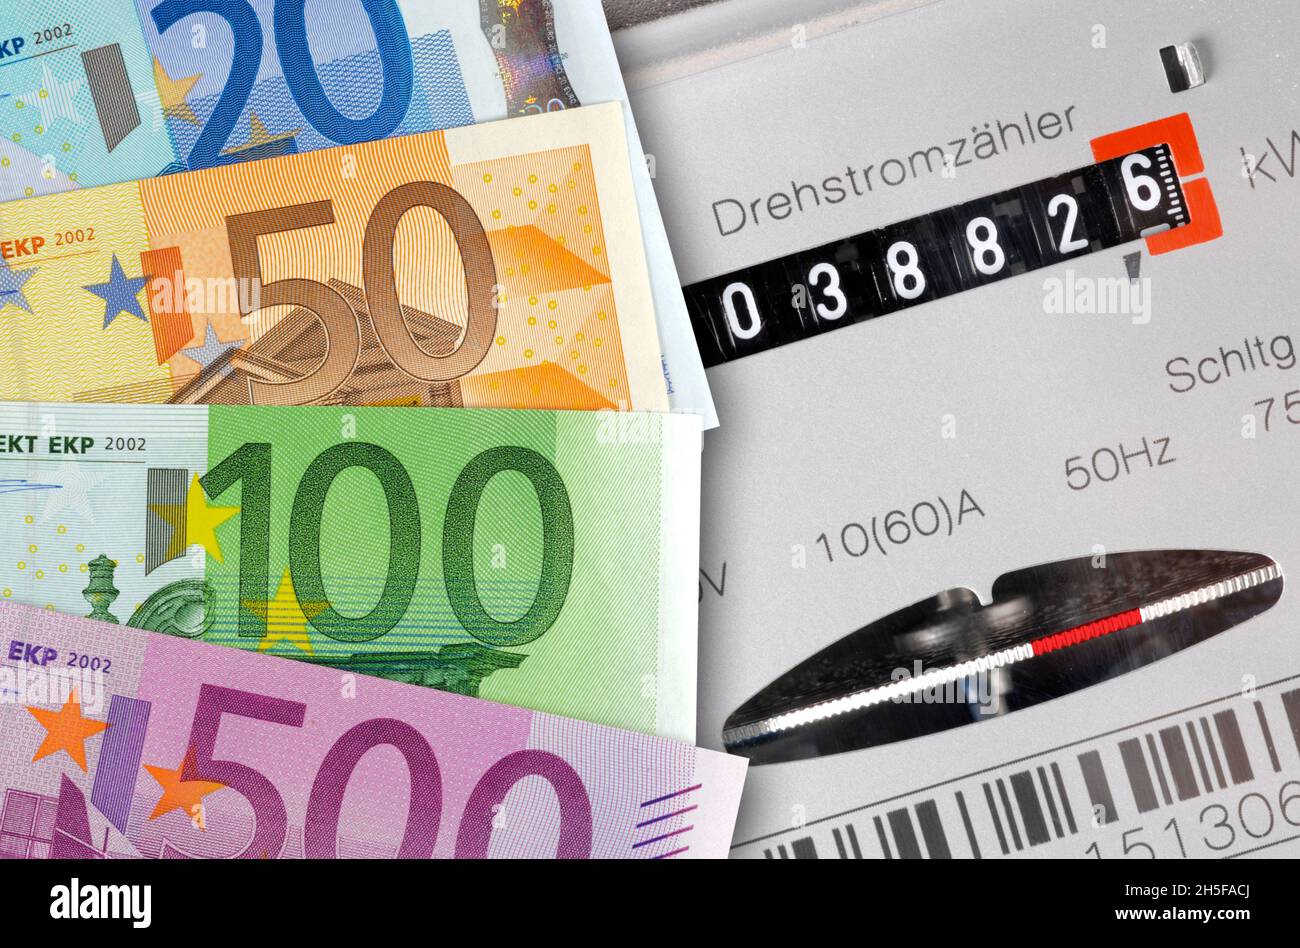 Euro banknotes and ancillary costs for energy Stock Photo